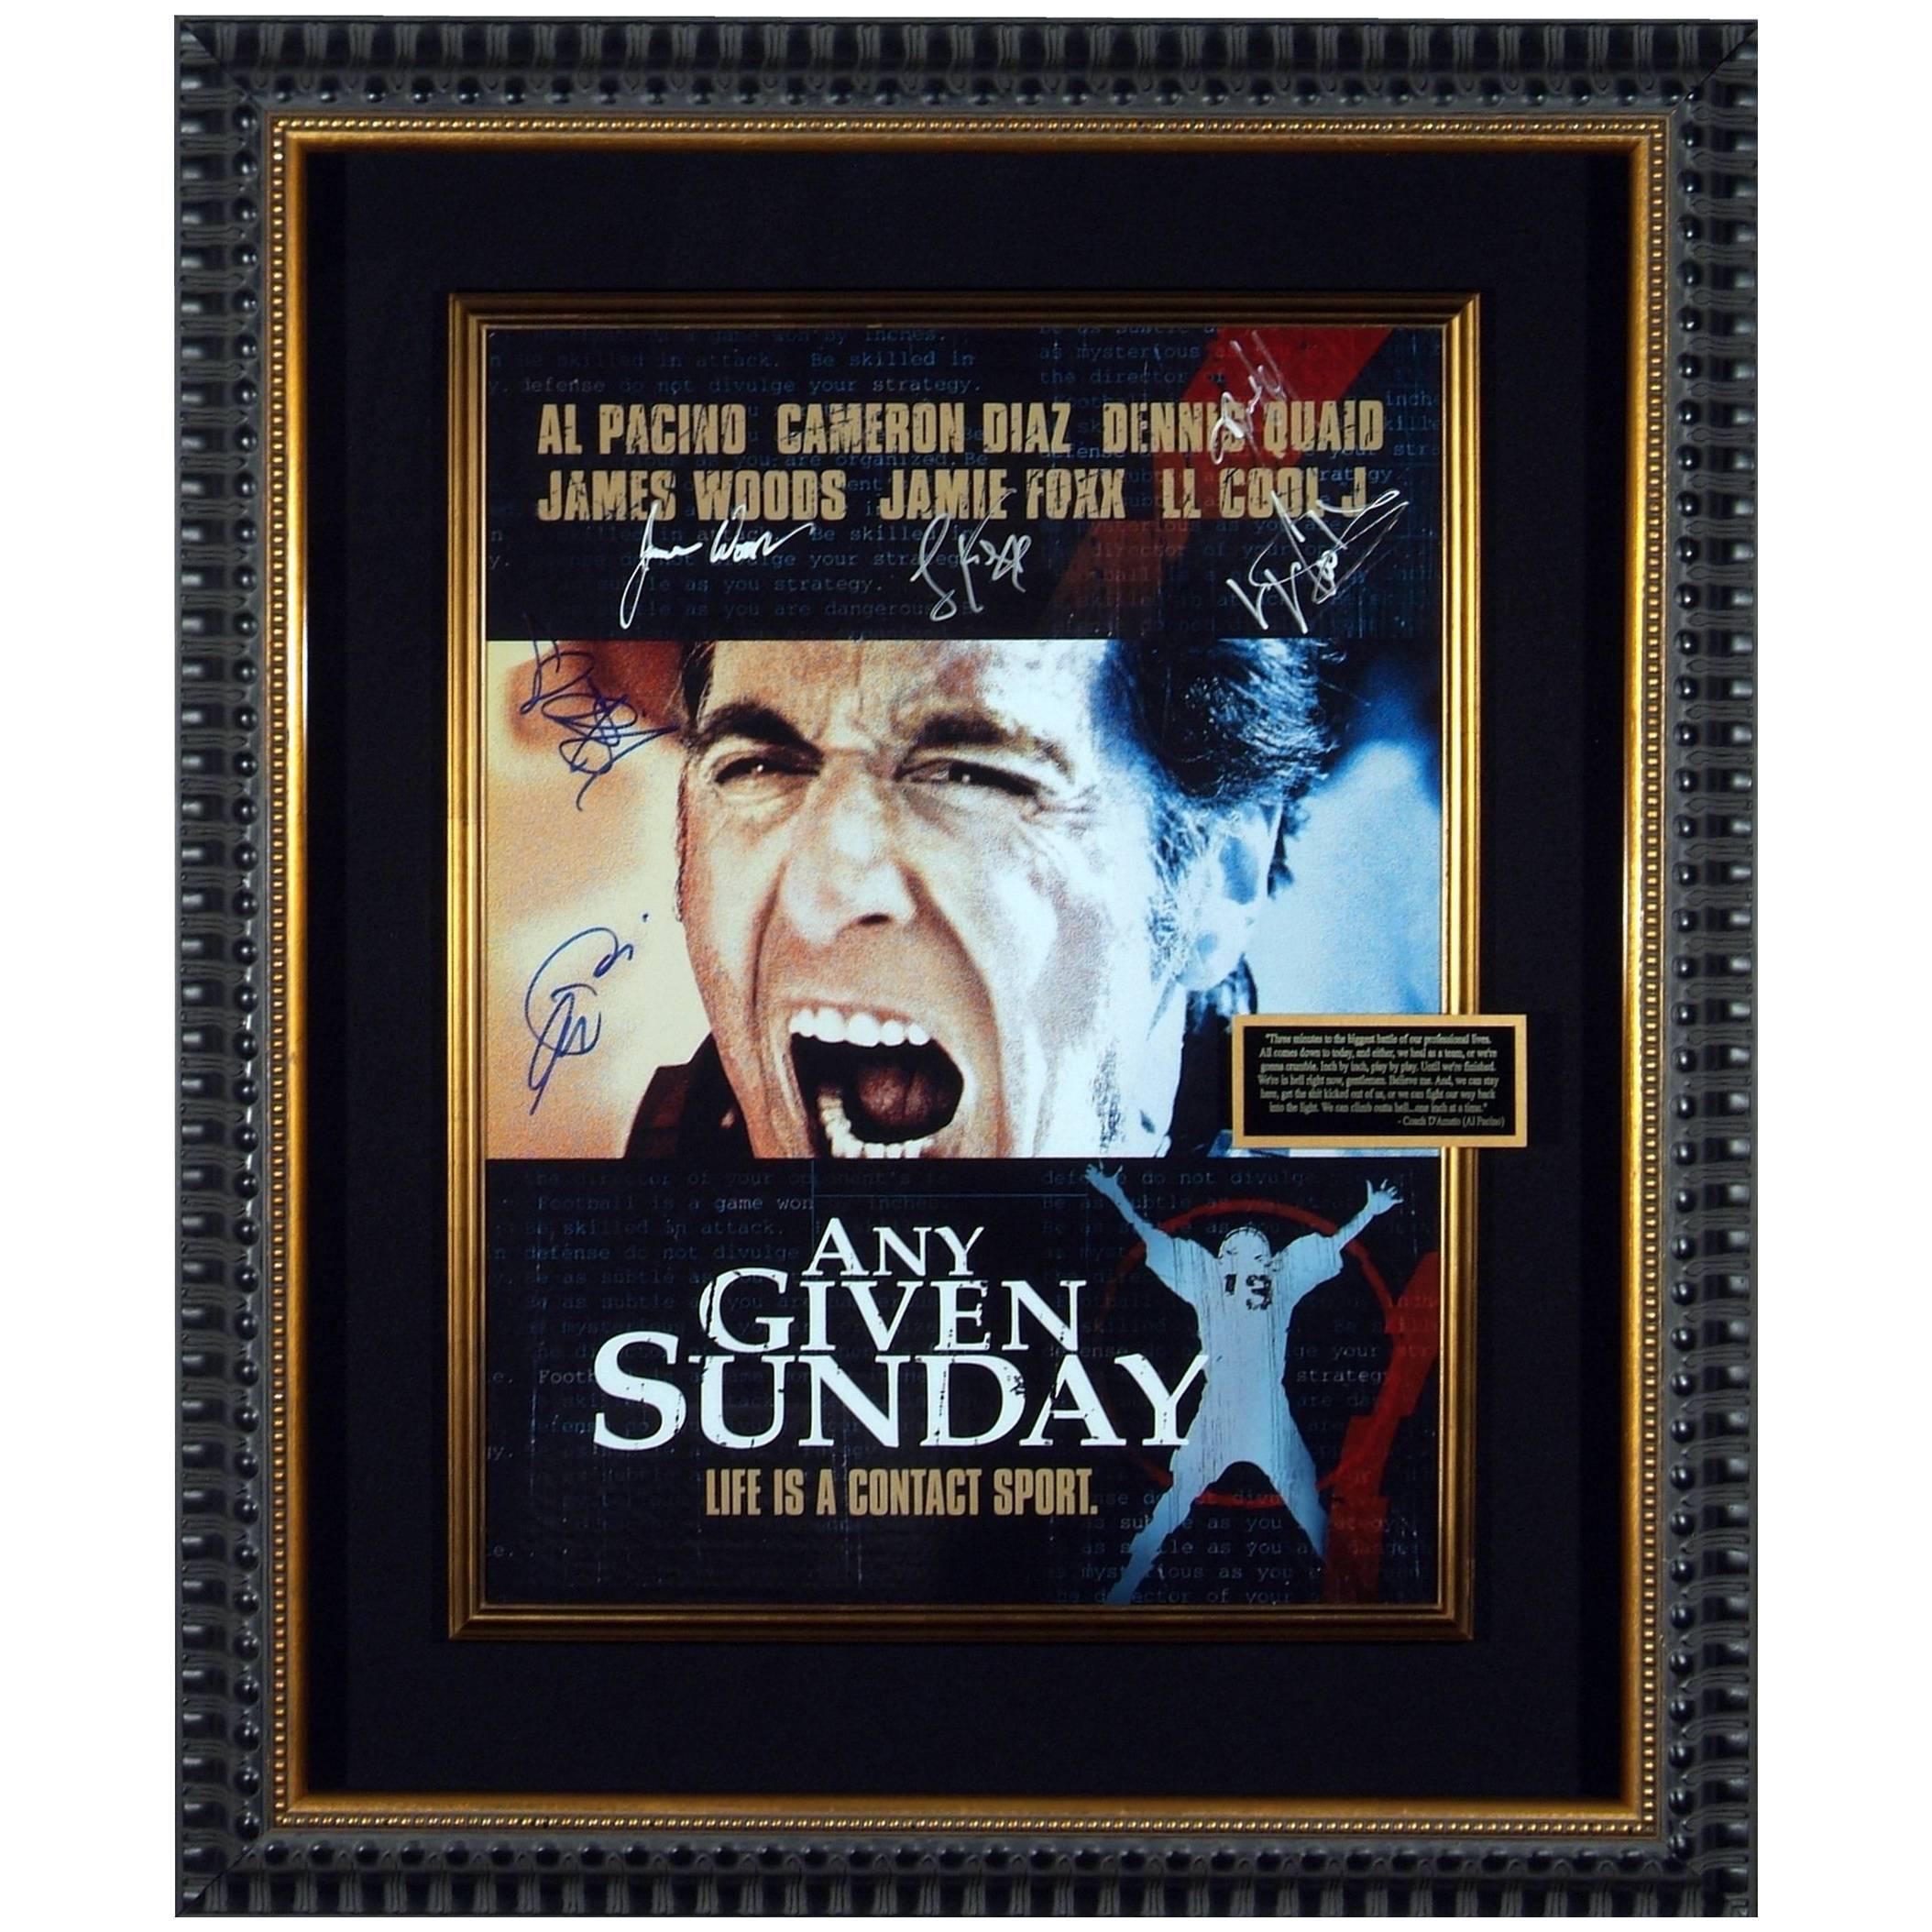 "Any Given Sunday" Cast Autographed Movie Poster Framed Memorabilia Display For Sale